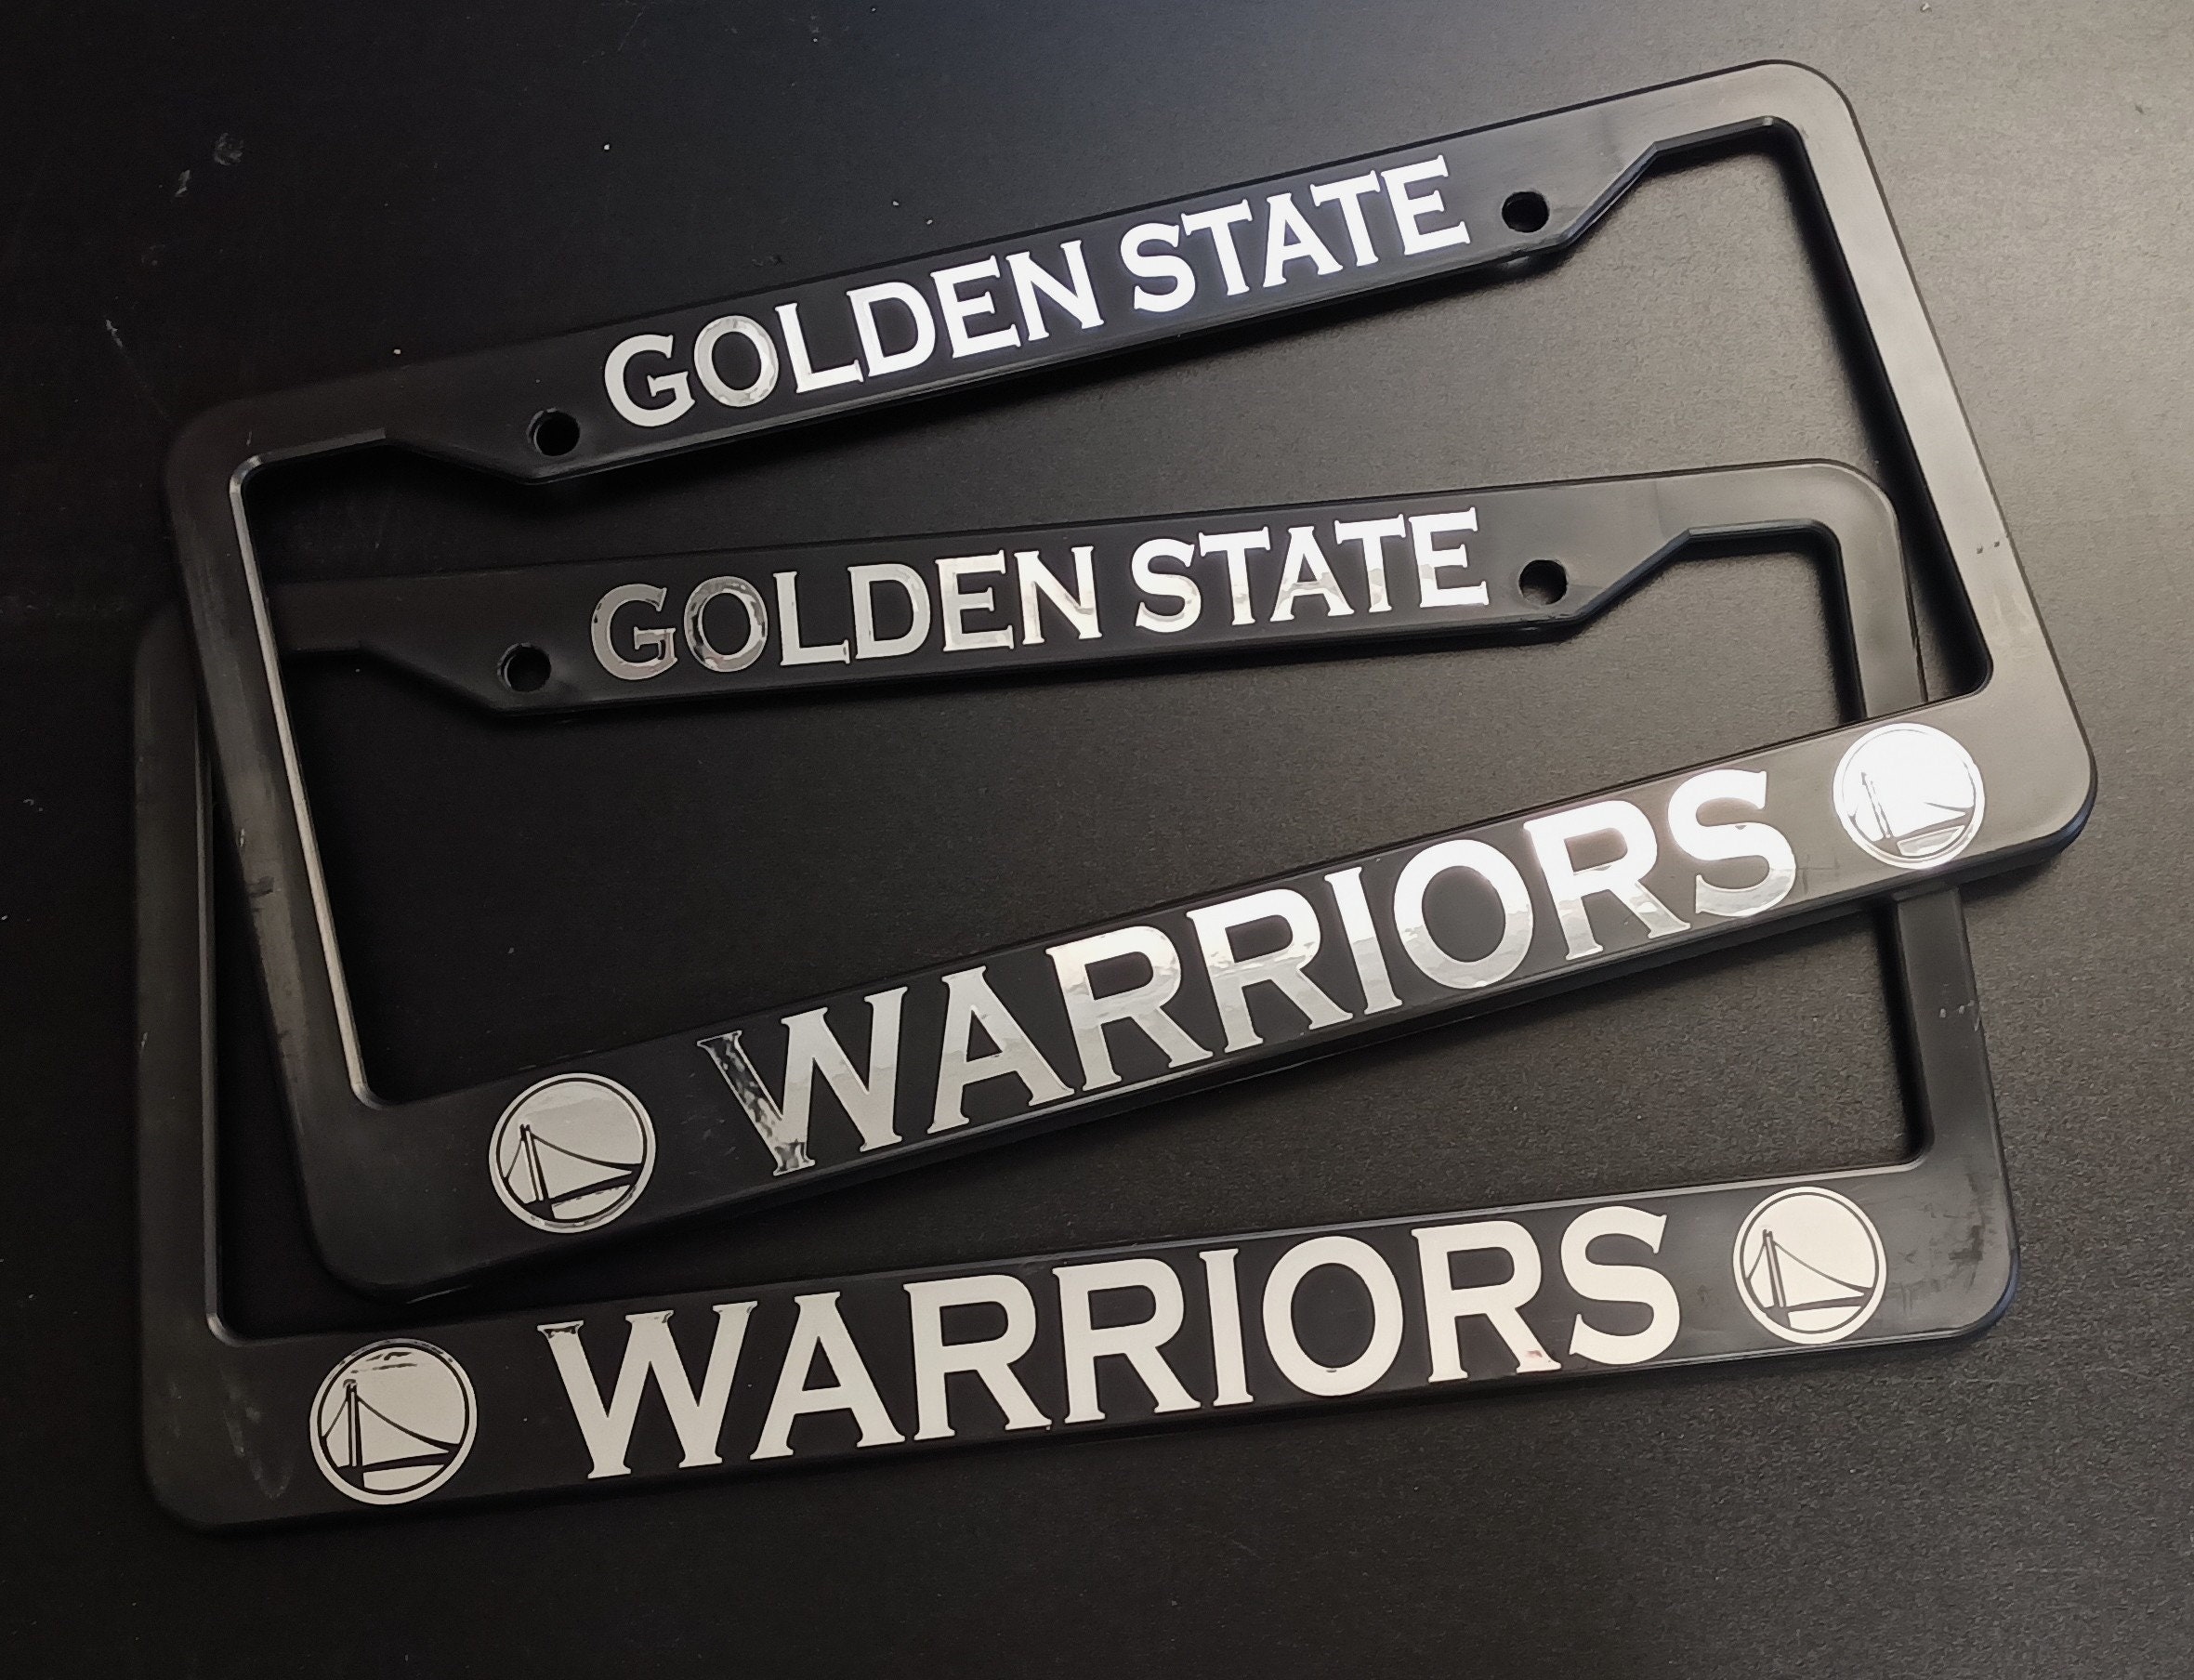 Official Golden State Warriors Car Accessories, Truck Decals, License  Plates